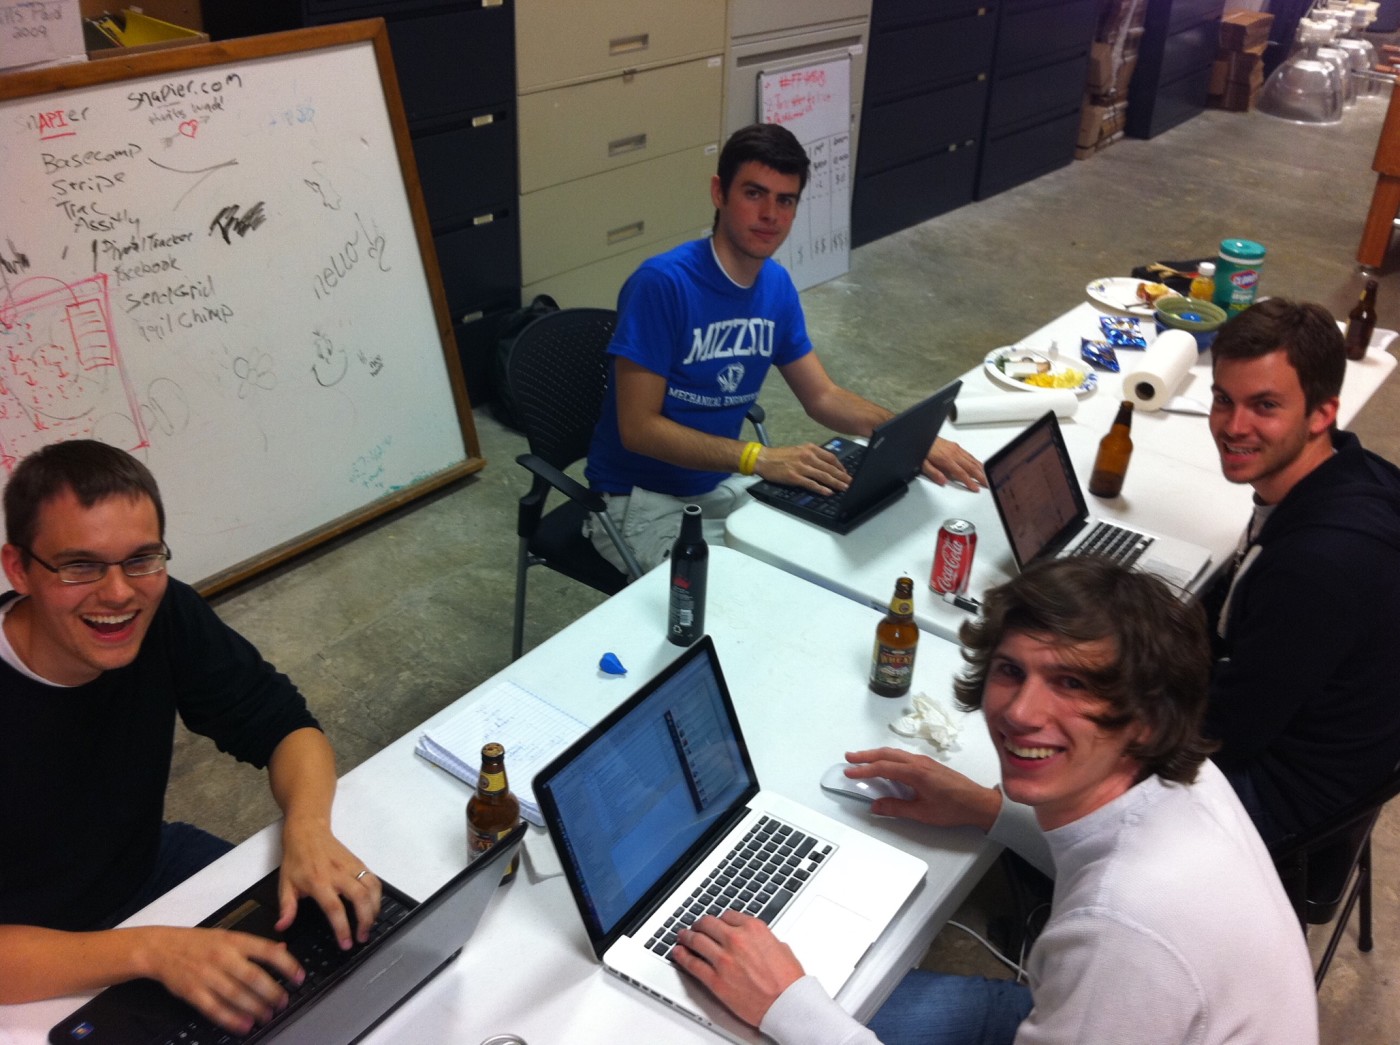 Zapier founders at Startup weekend